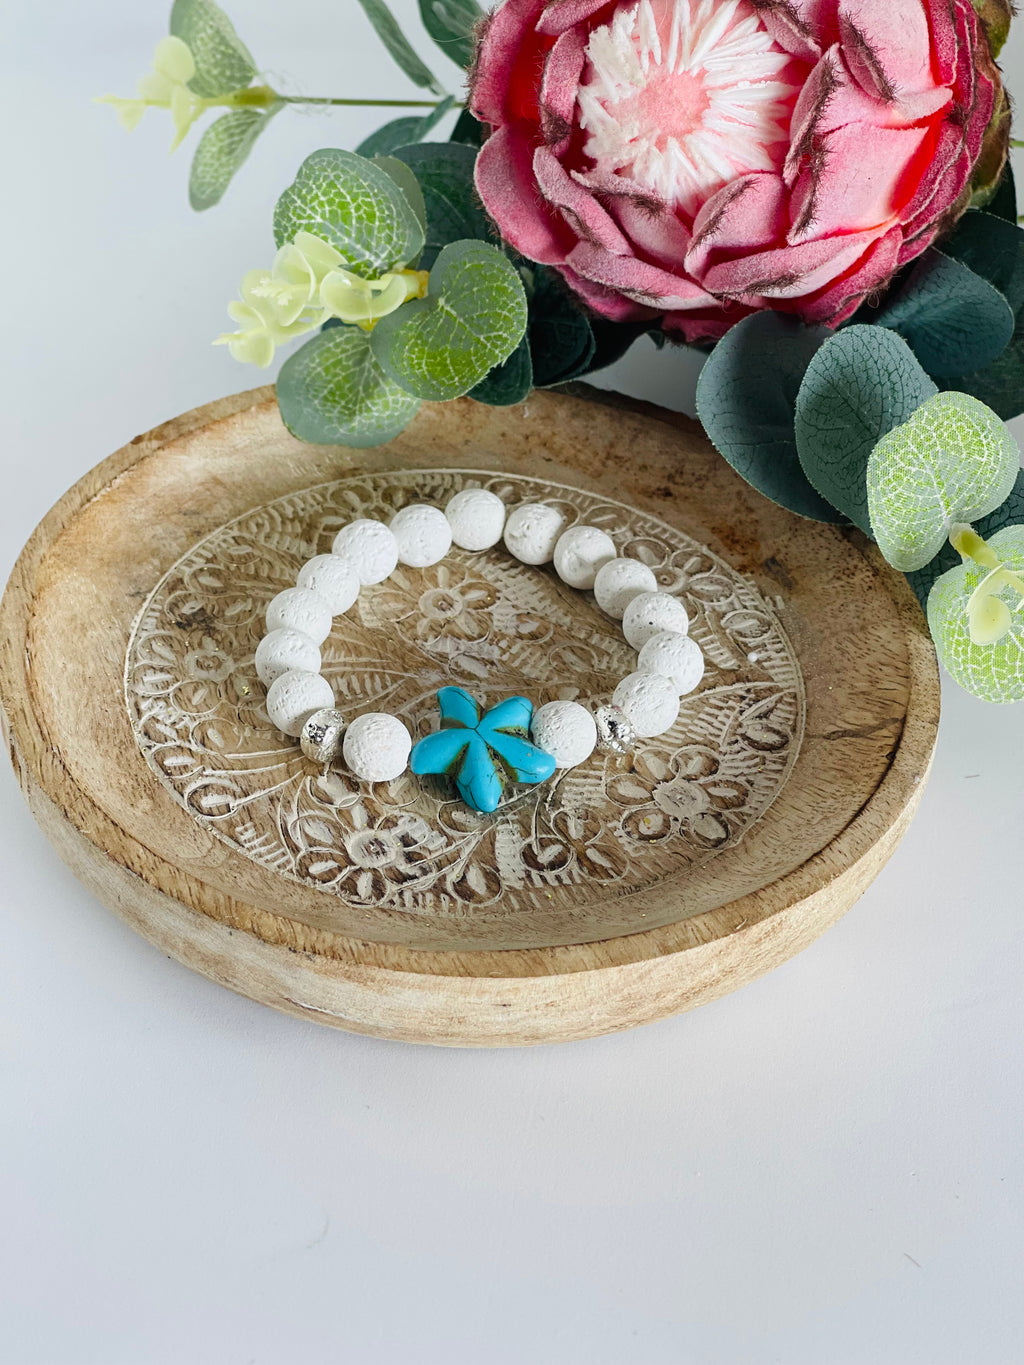 White lava bead with turquoise flower bead